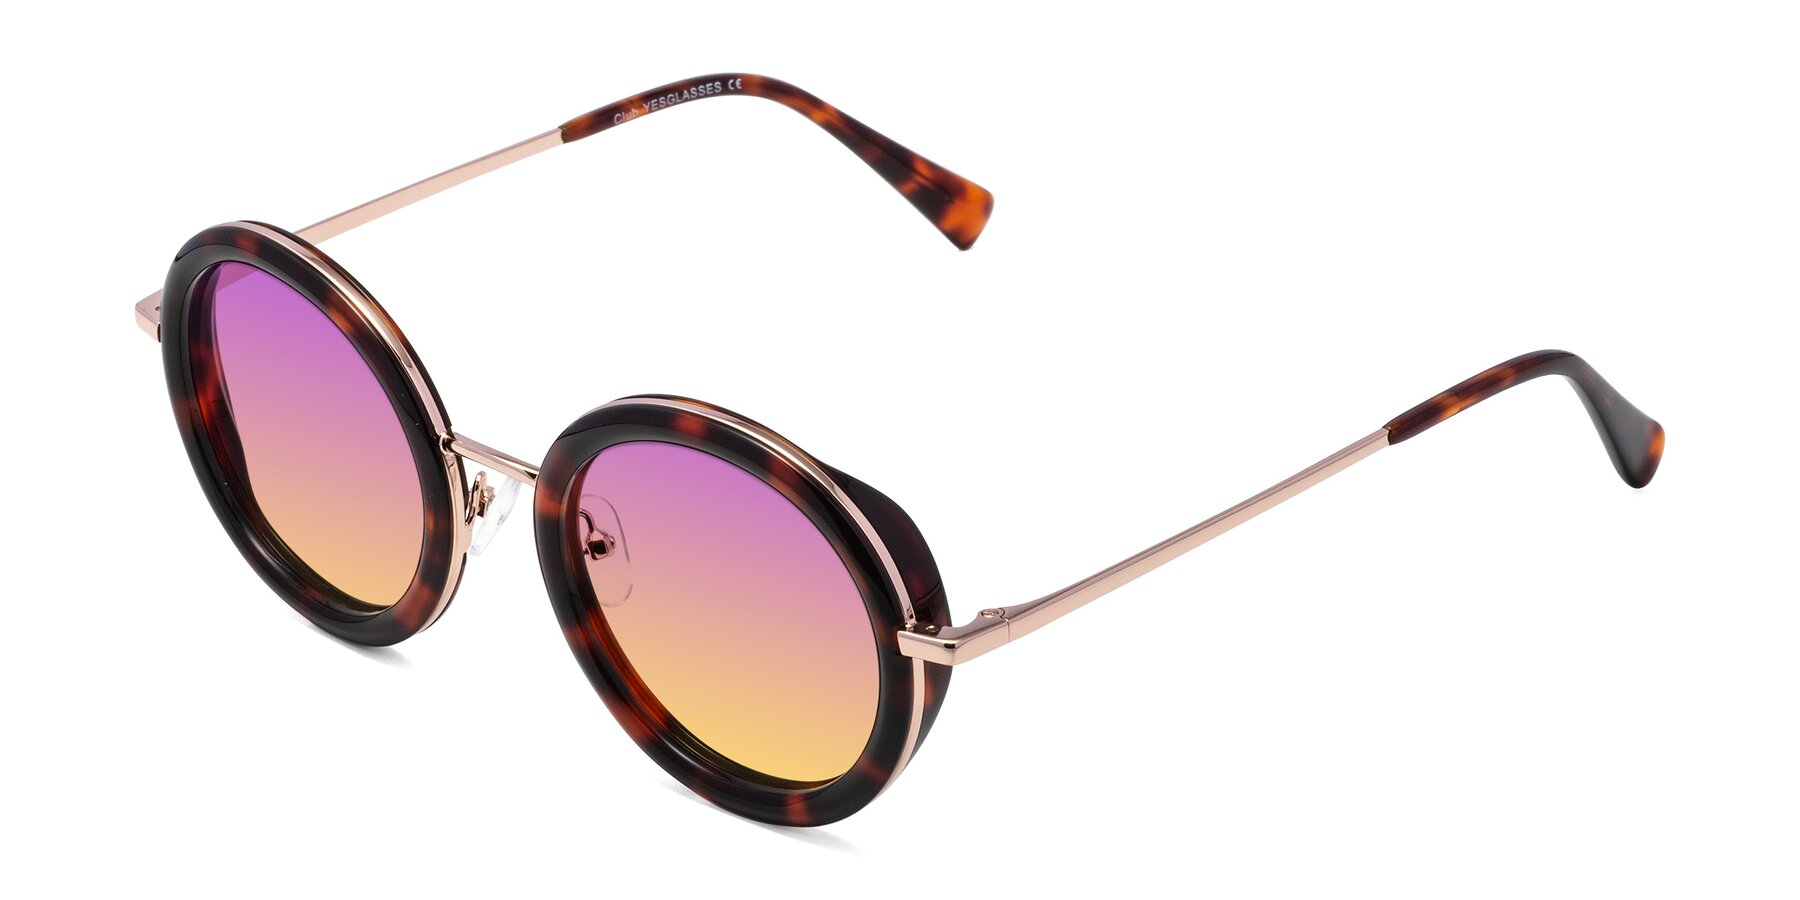 Angle of Club in Tortoise-Rose Gold with Purple / Yellow Gradient Lenses